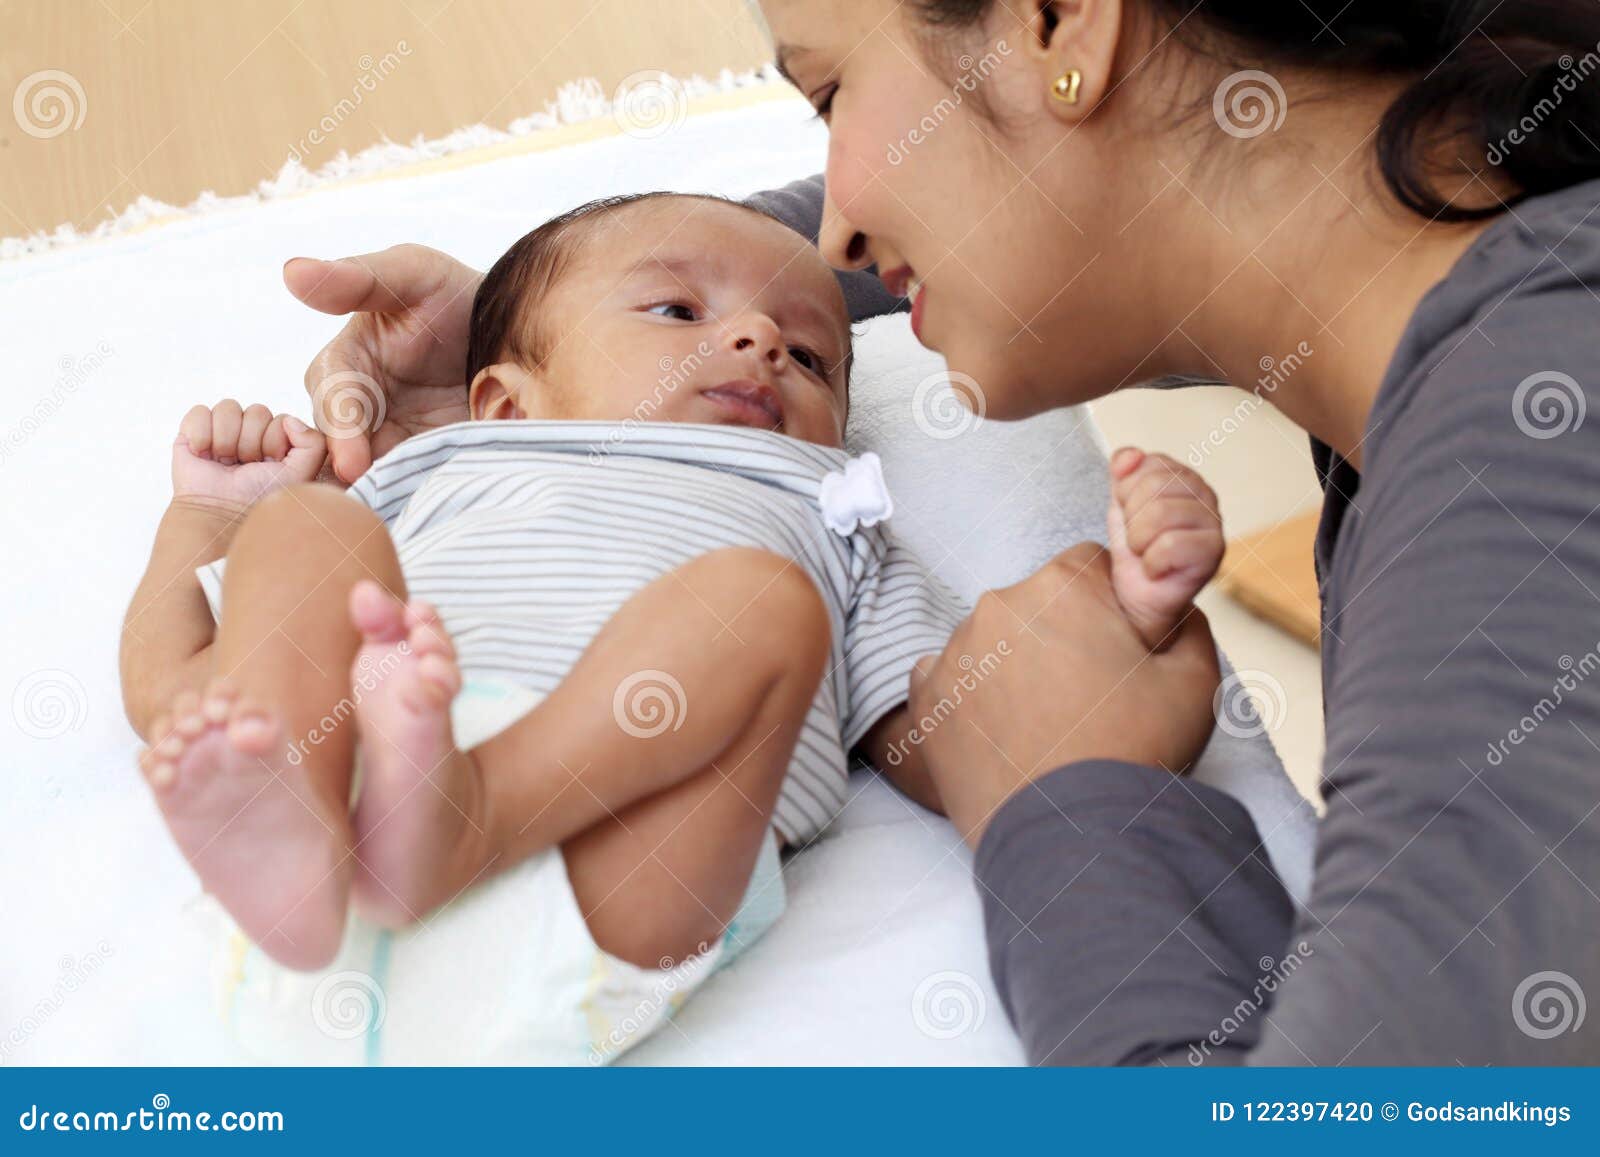 Mother and Newborn Baby Love Stock Photo - Image of females ...